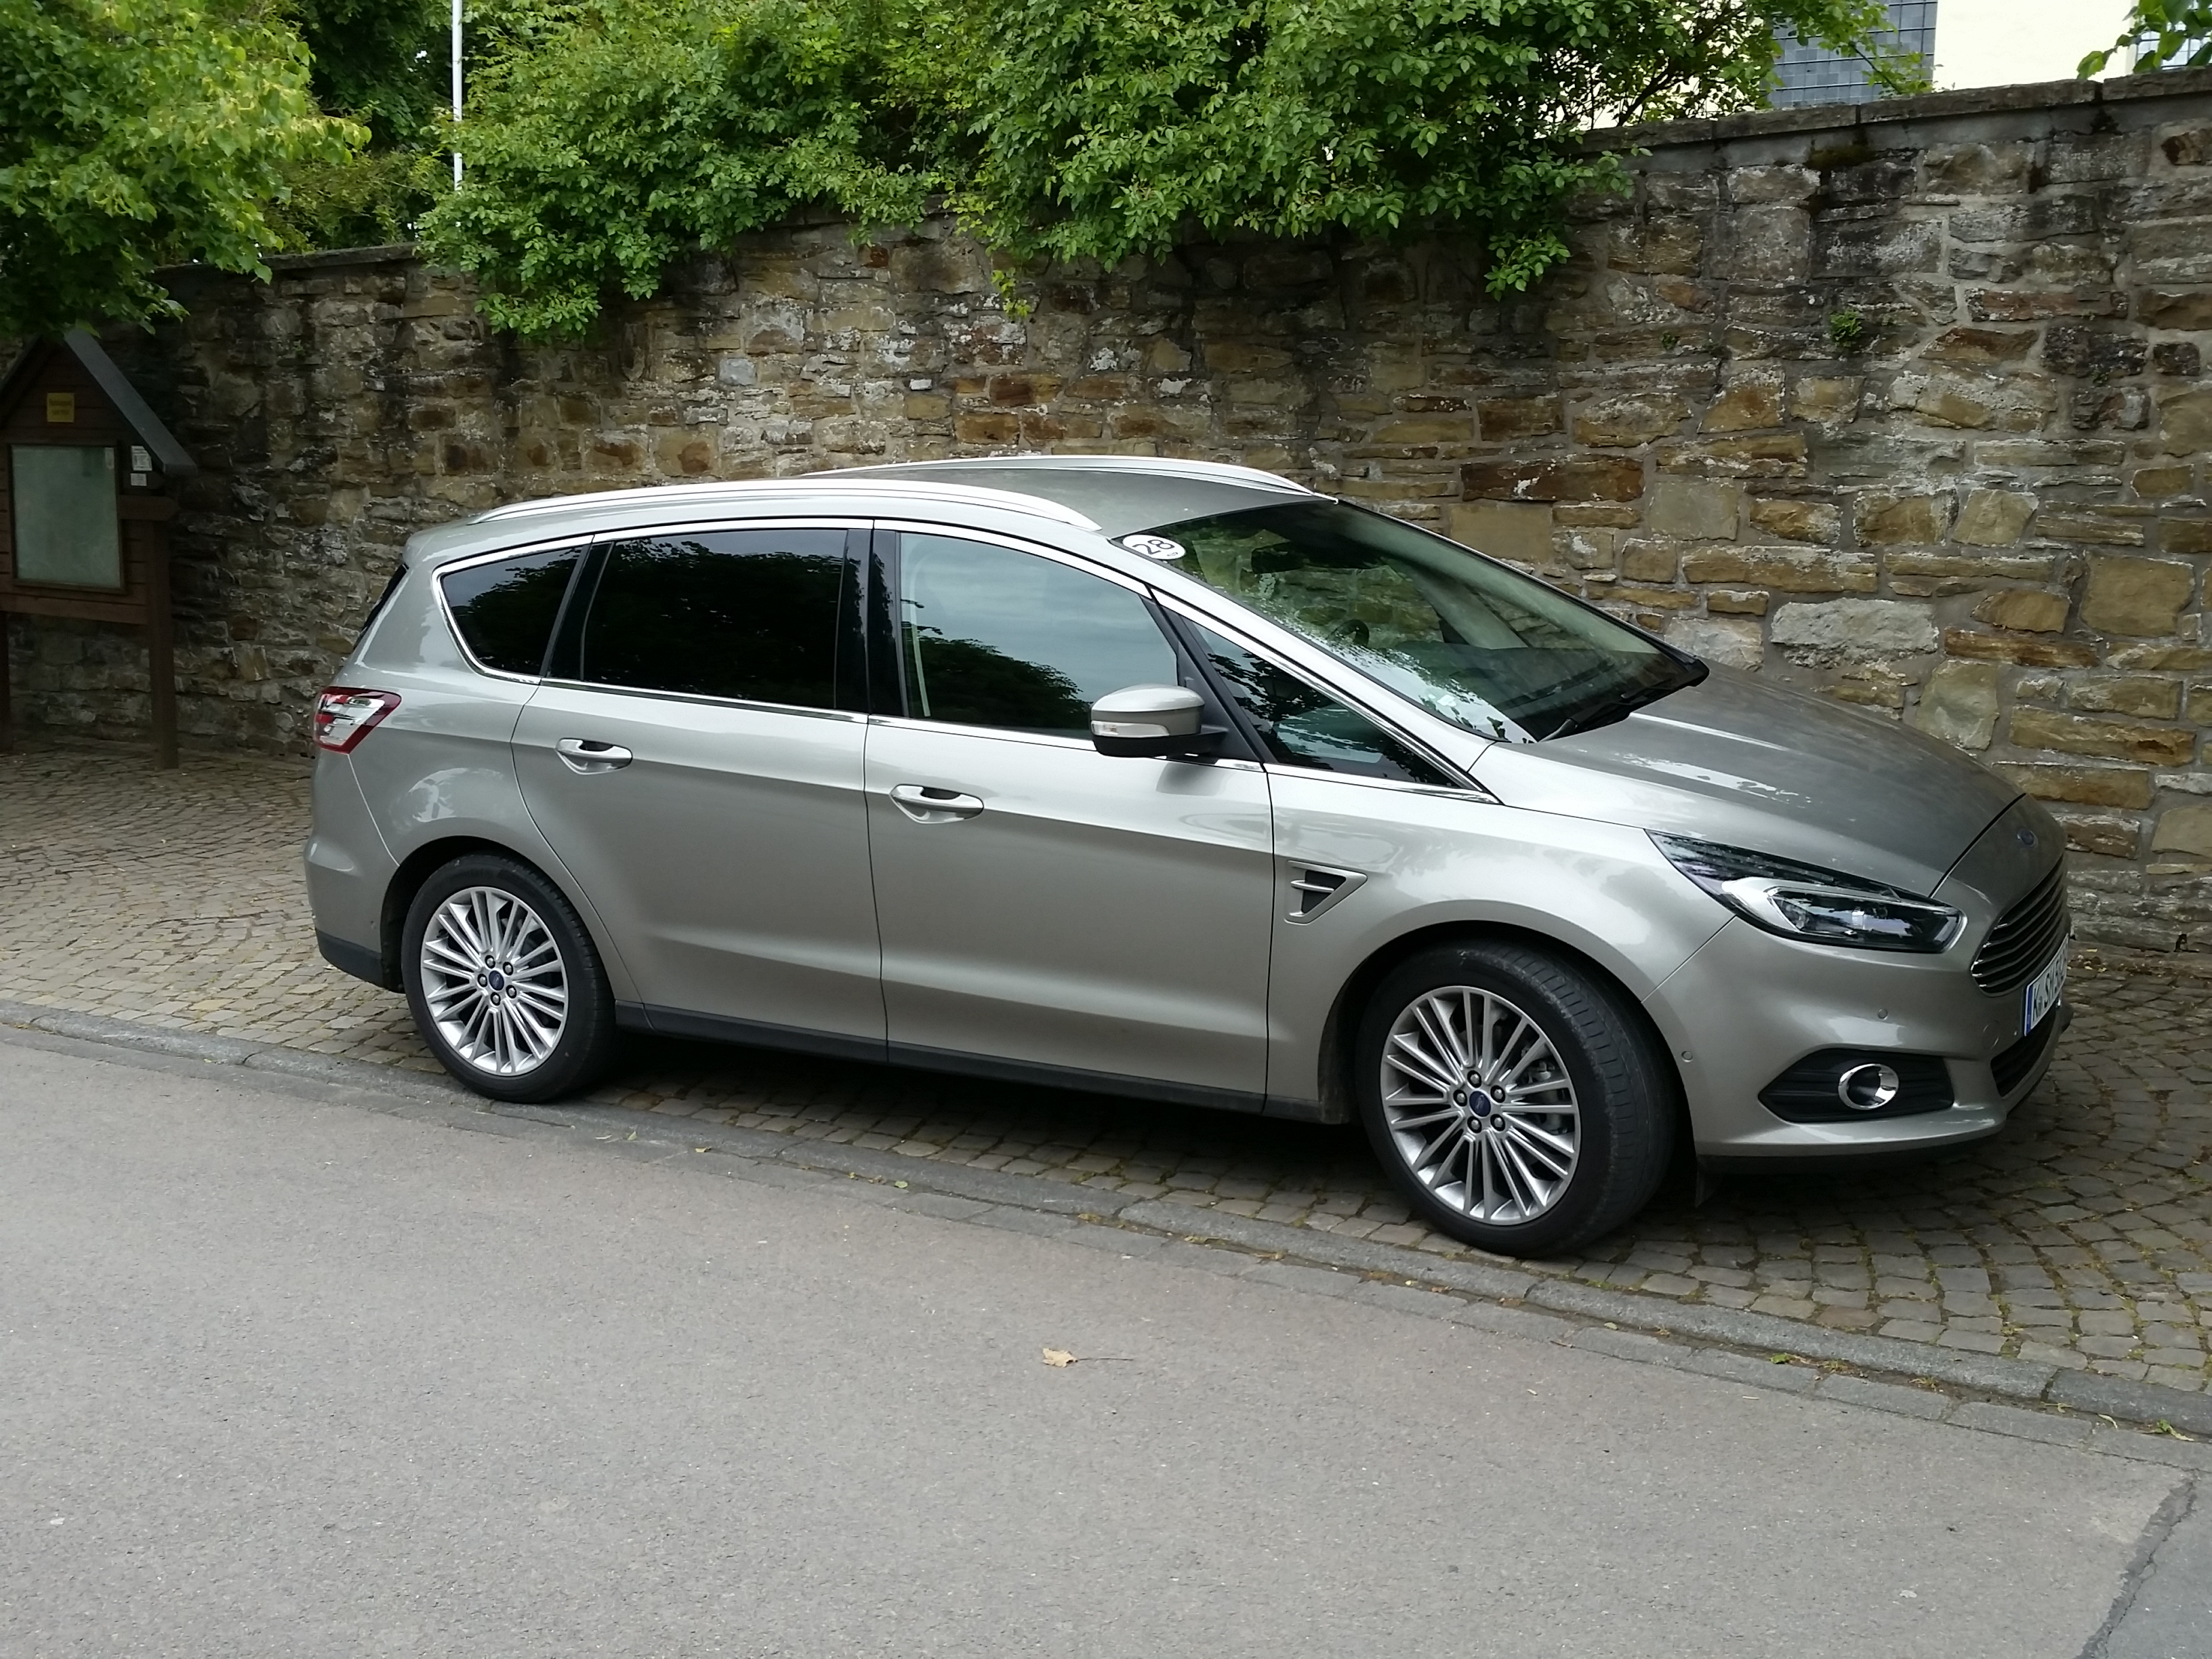 Ford S Max Im Familiencheck Auf Youtube Daddylicious